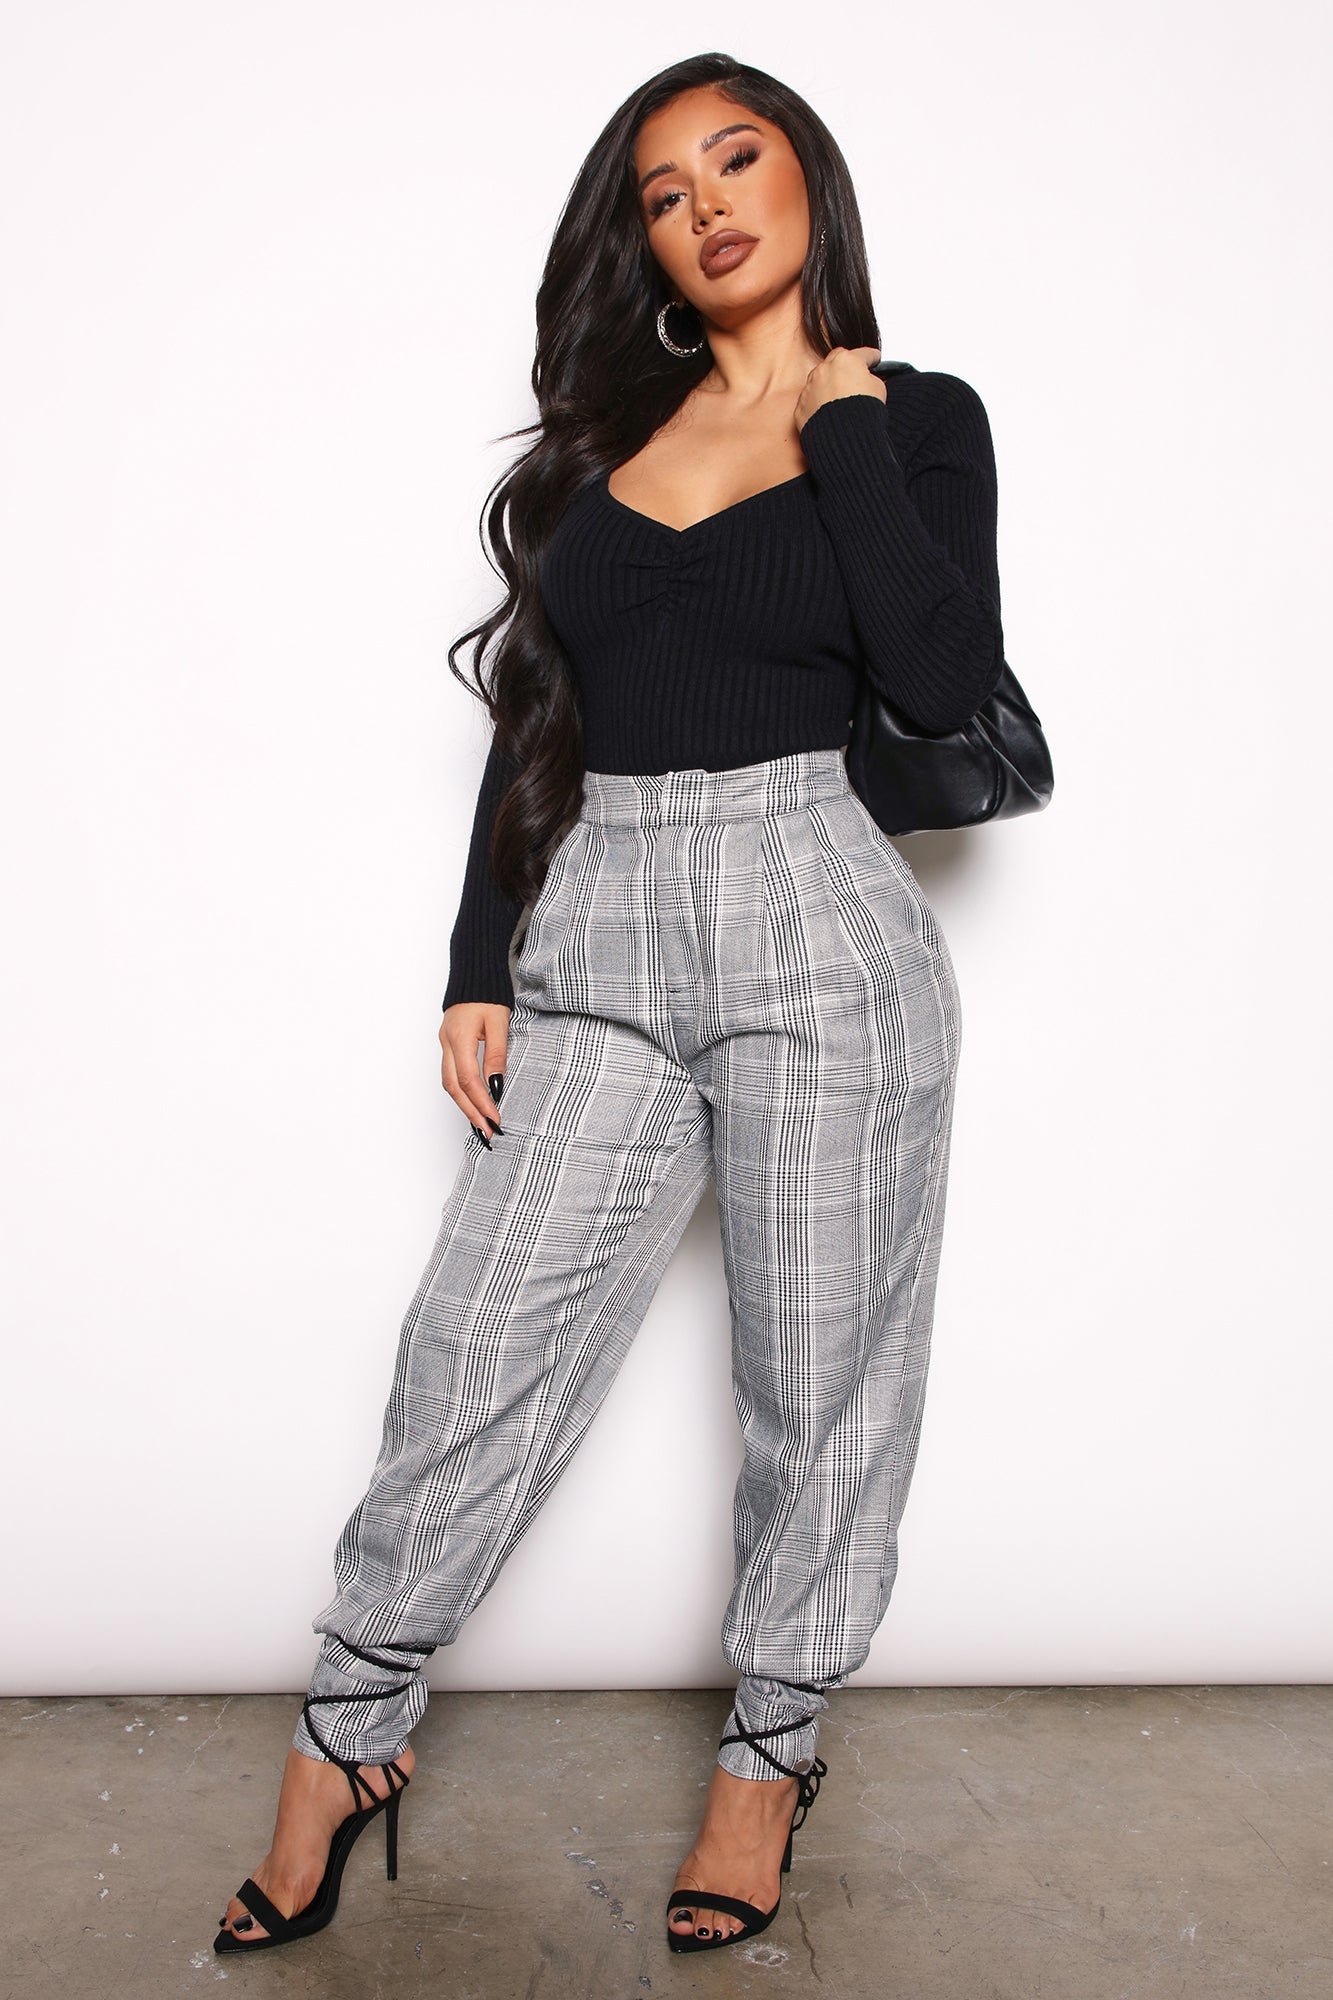 Grey Plaid Pants Outfits For Women (29 ideas & outfits)